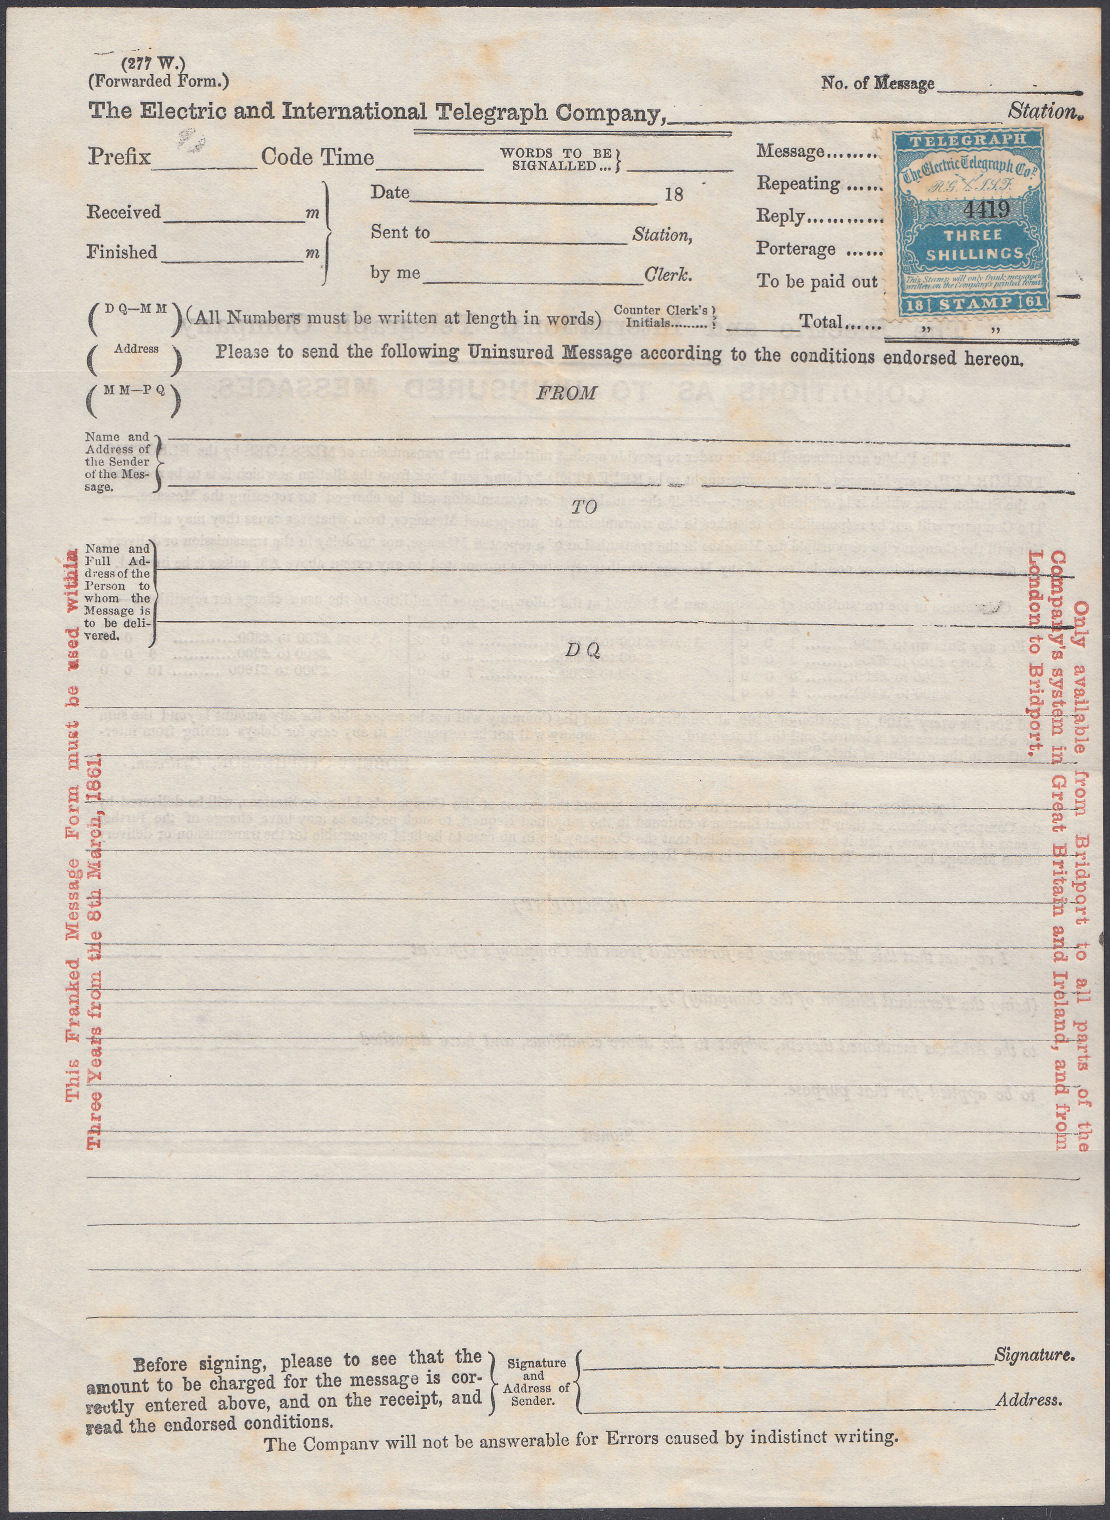 Electric Telegraph Form 277 - front.